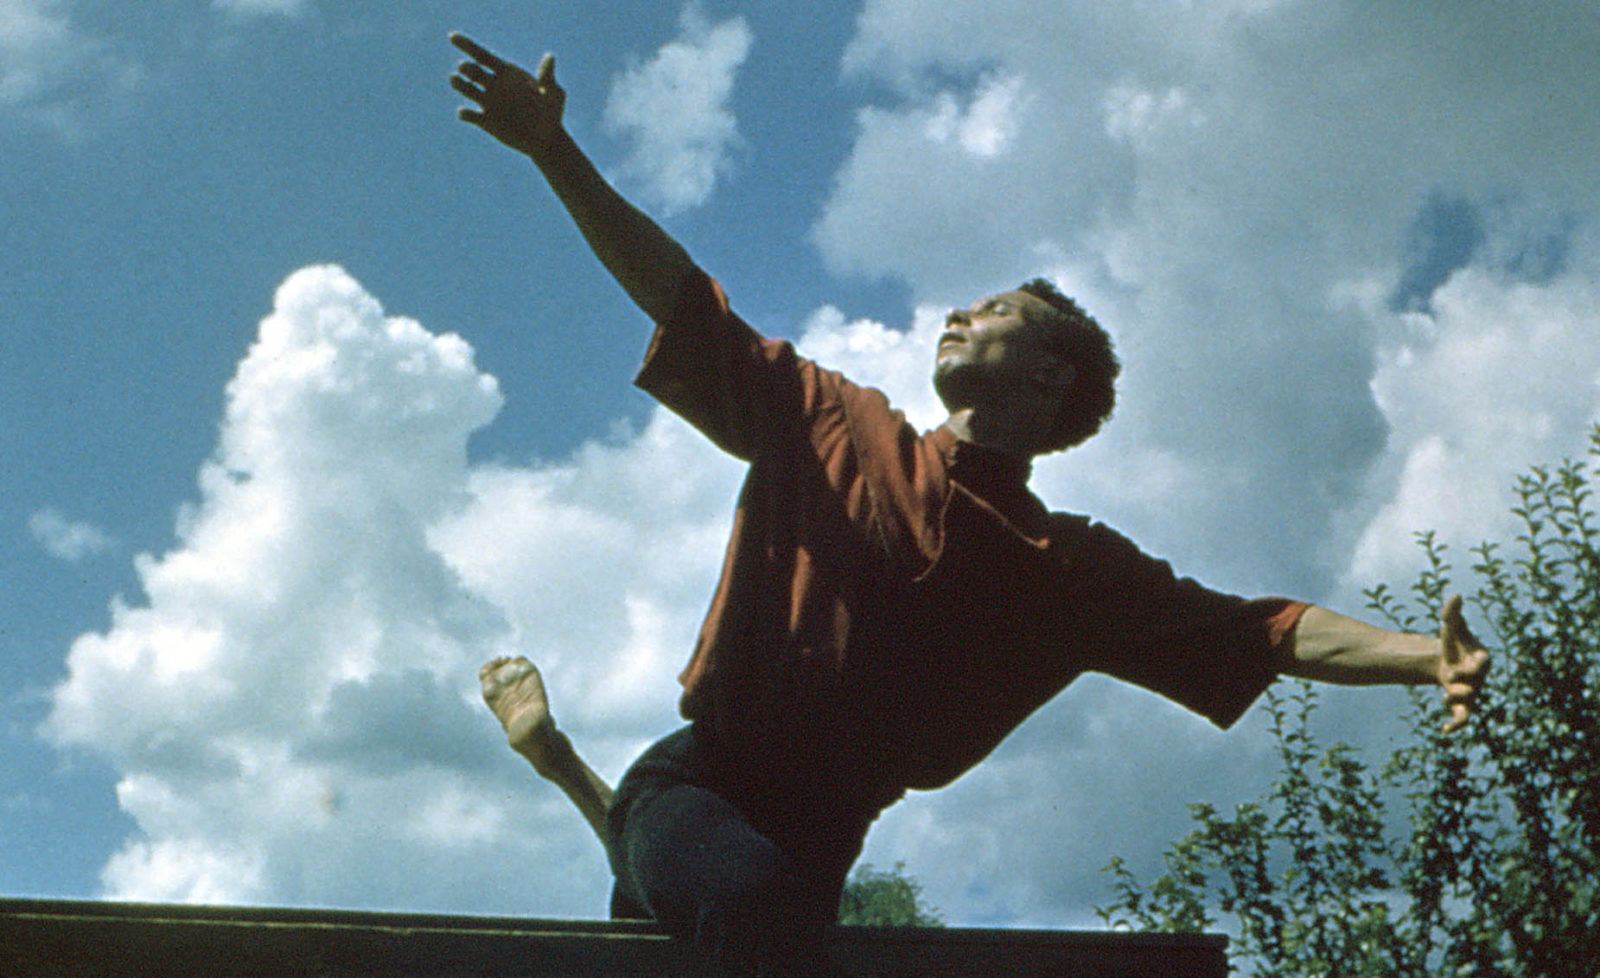 Talley Beatty, a black man, looks towards the sky and reaches one arm upward while sitting on a bench.